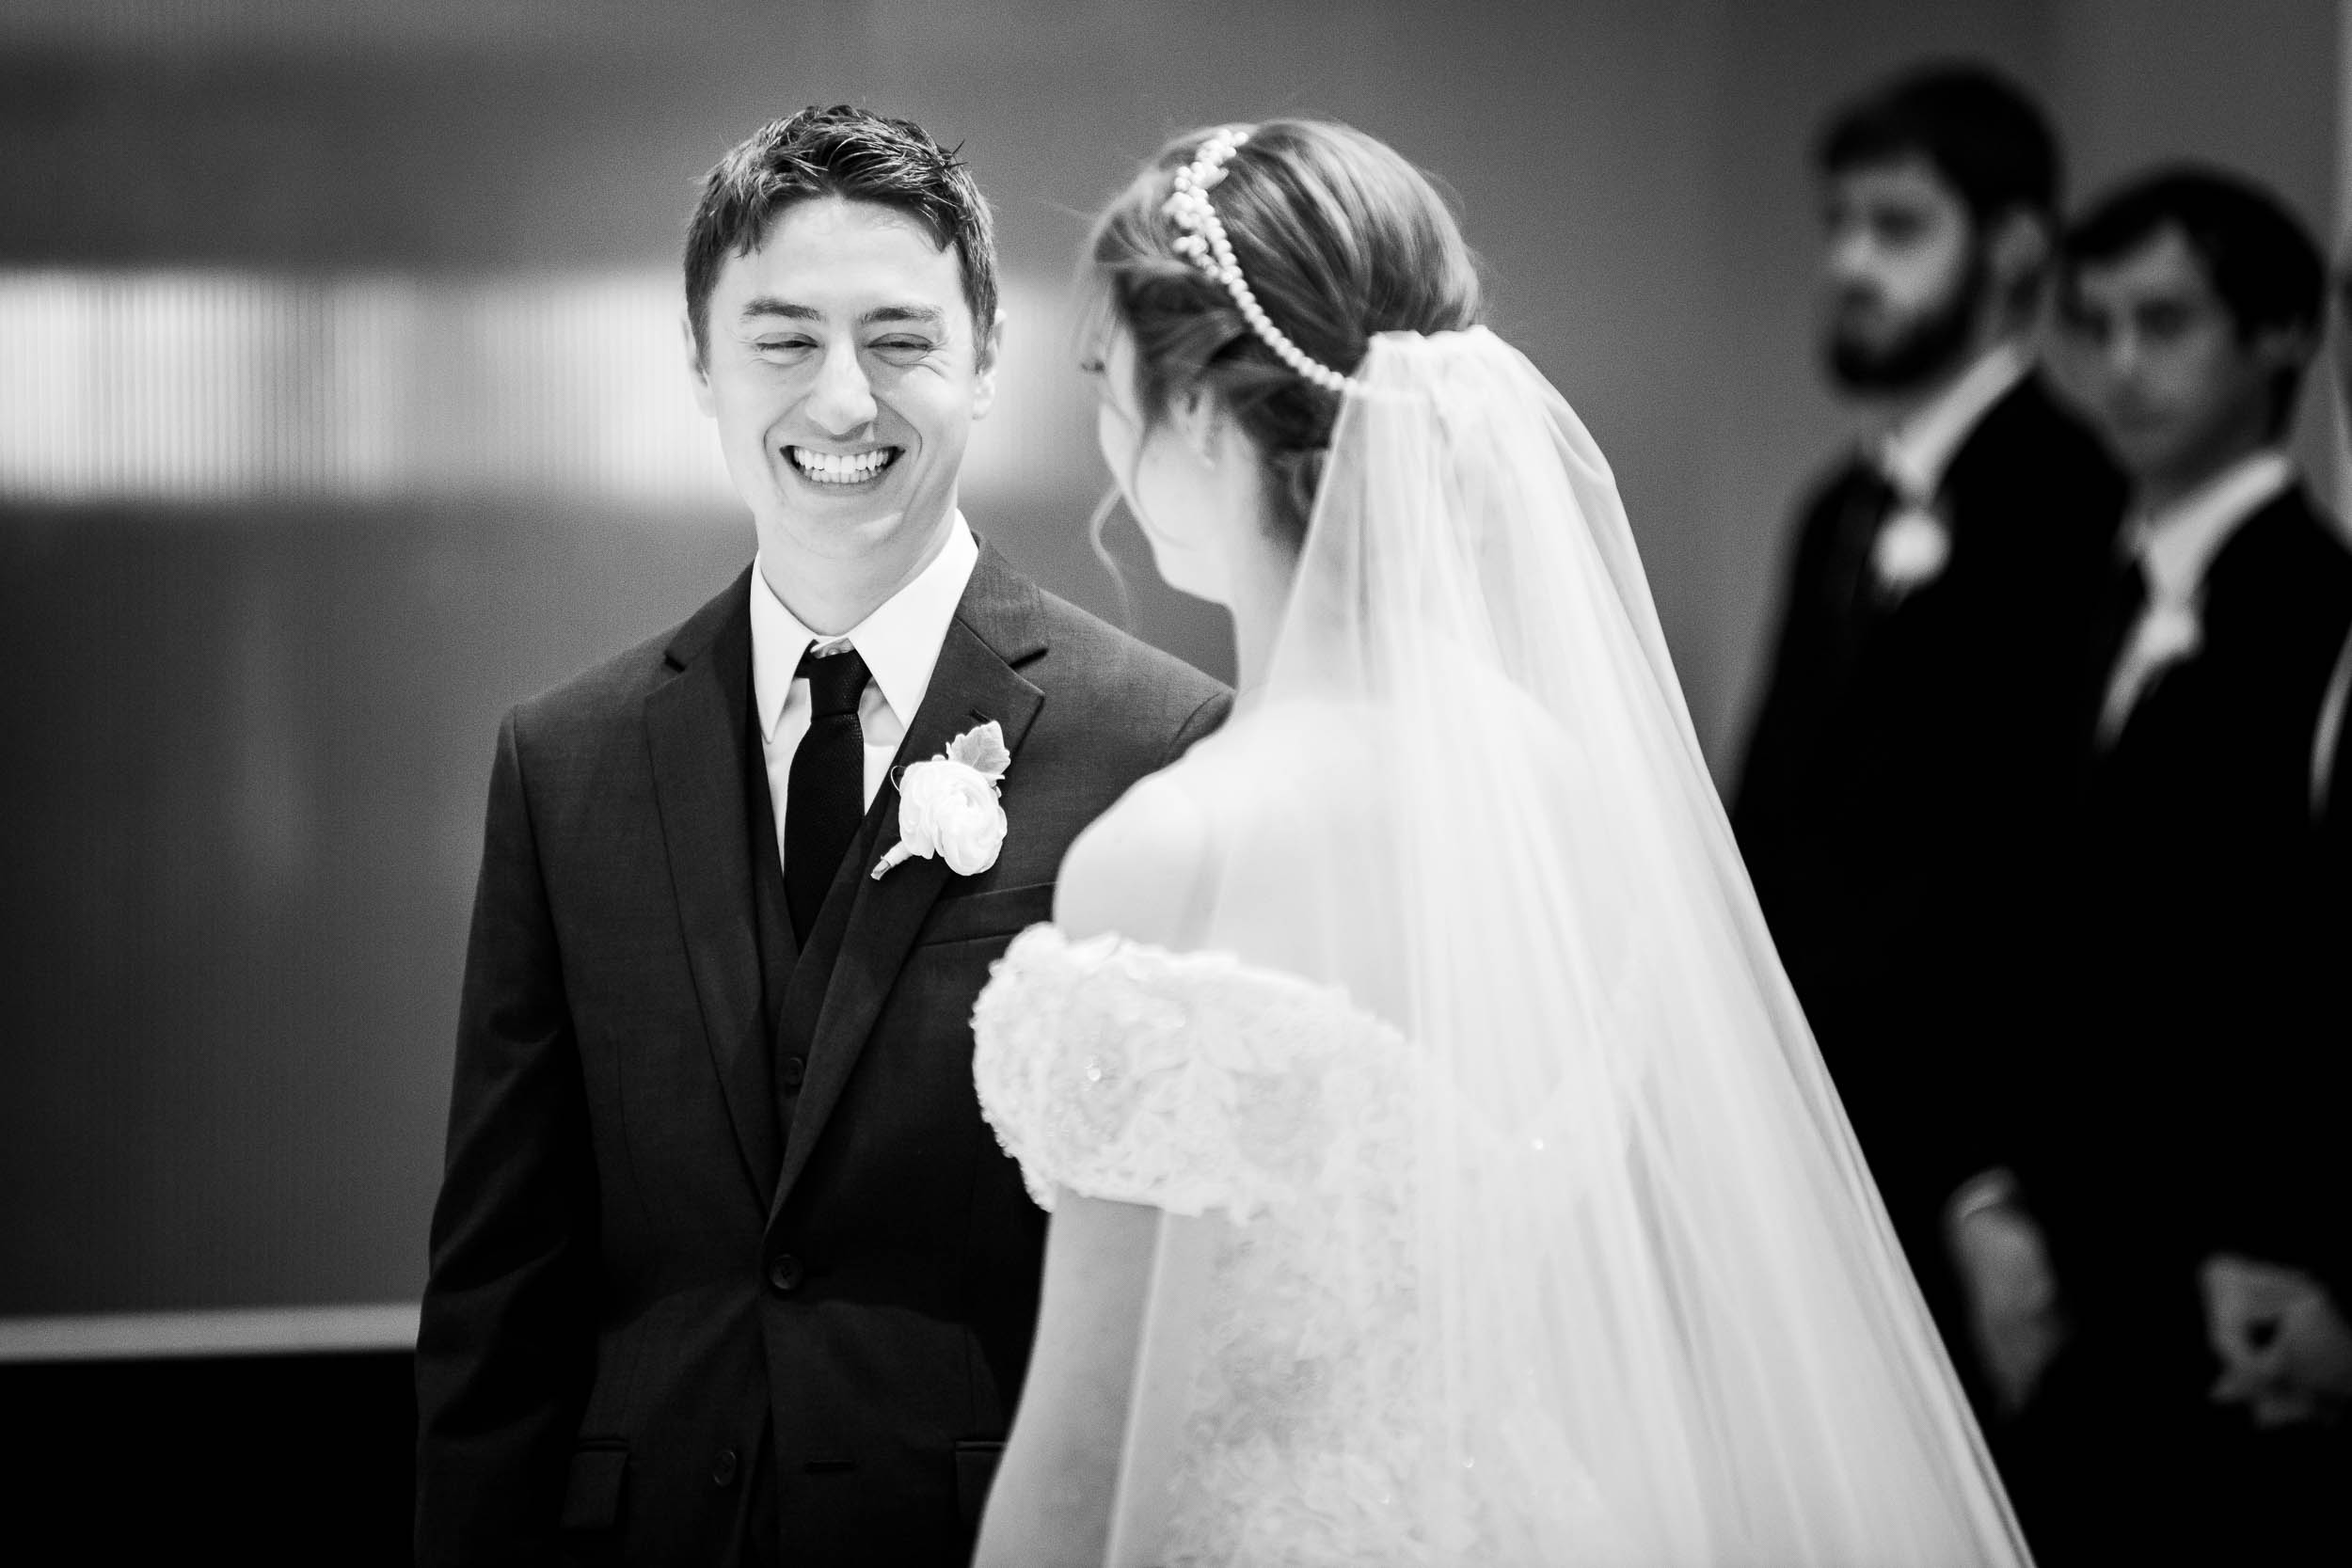 Groom laughs with the bride during a wedding ceremony at Madonna Della Strada.